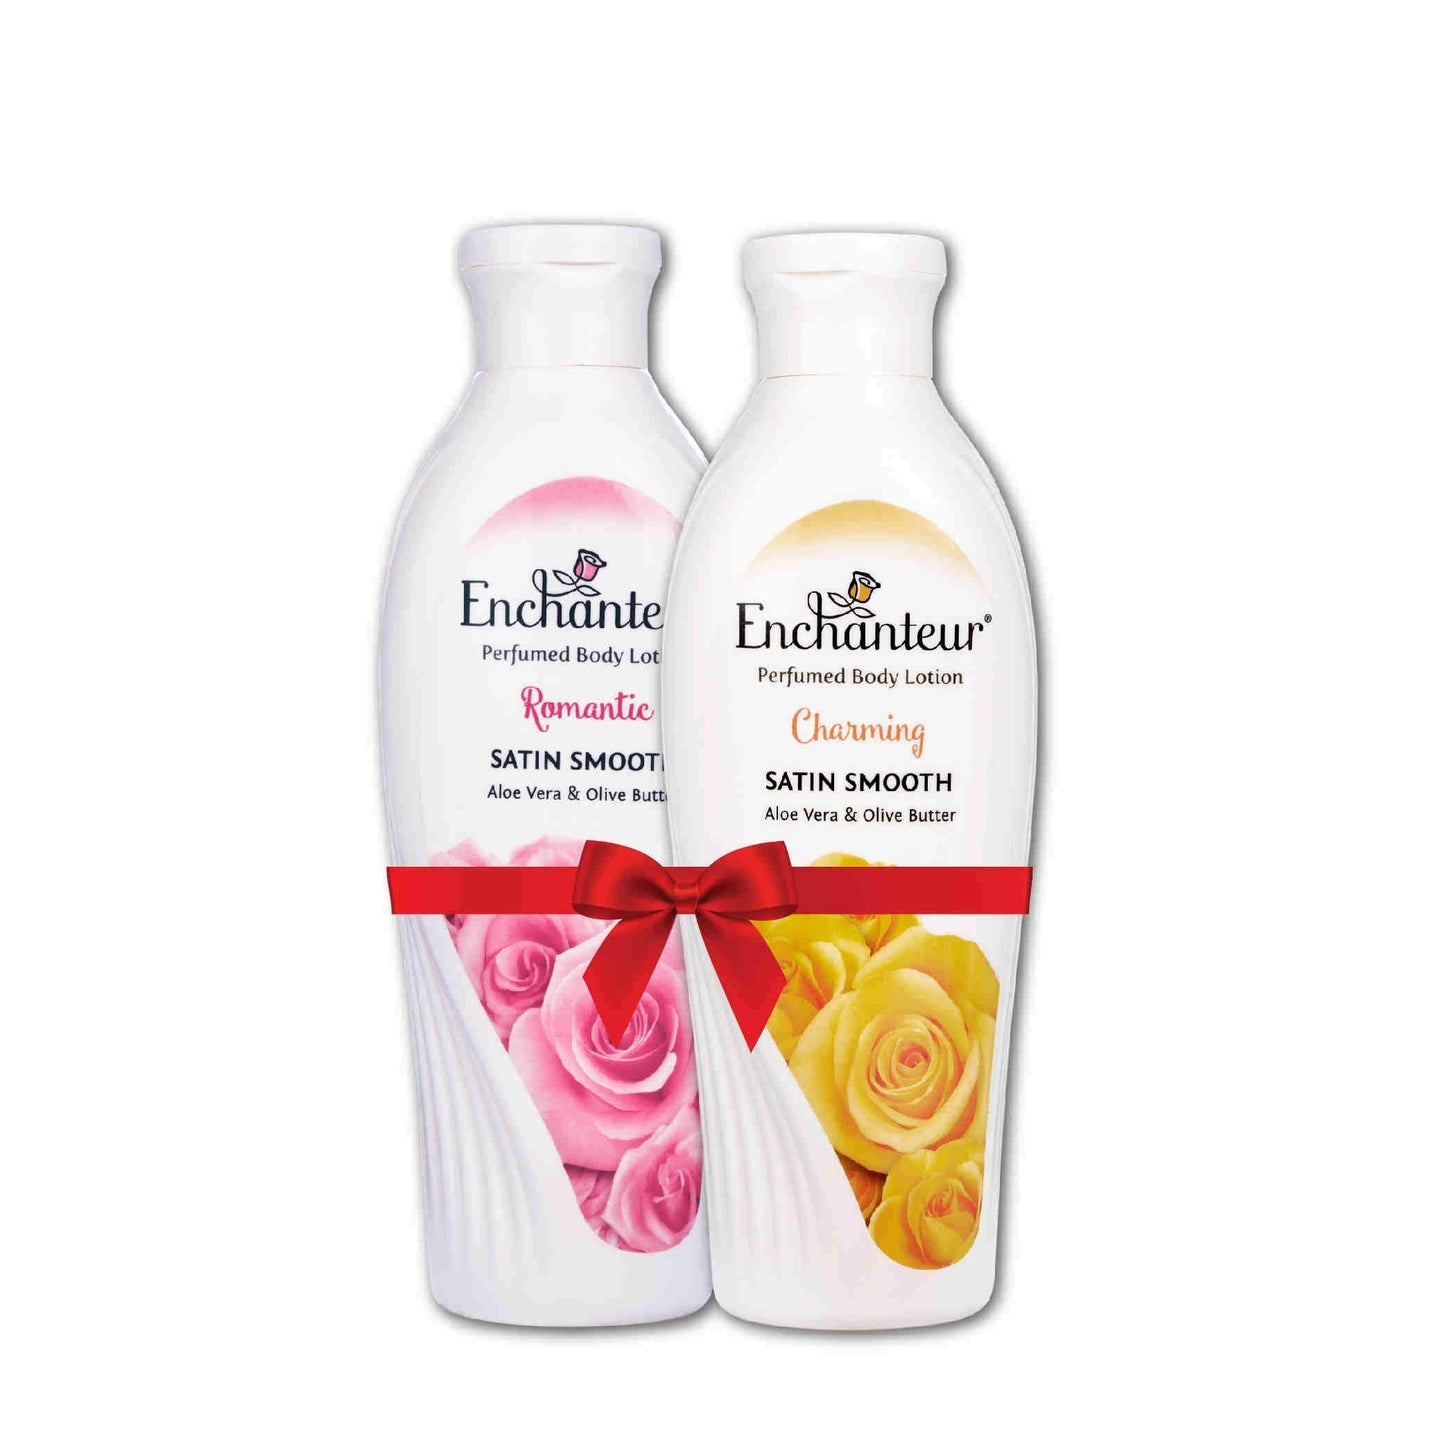 Enchanteur Romantic And Charming Perfumed Body Lotion For Women Combo Pack